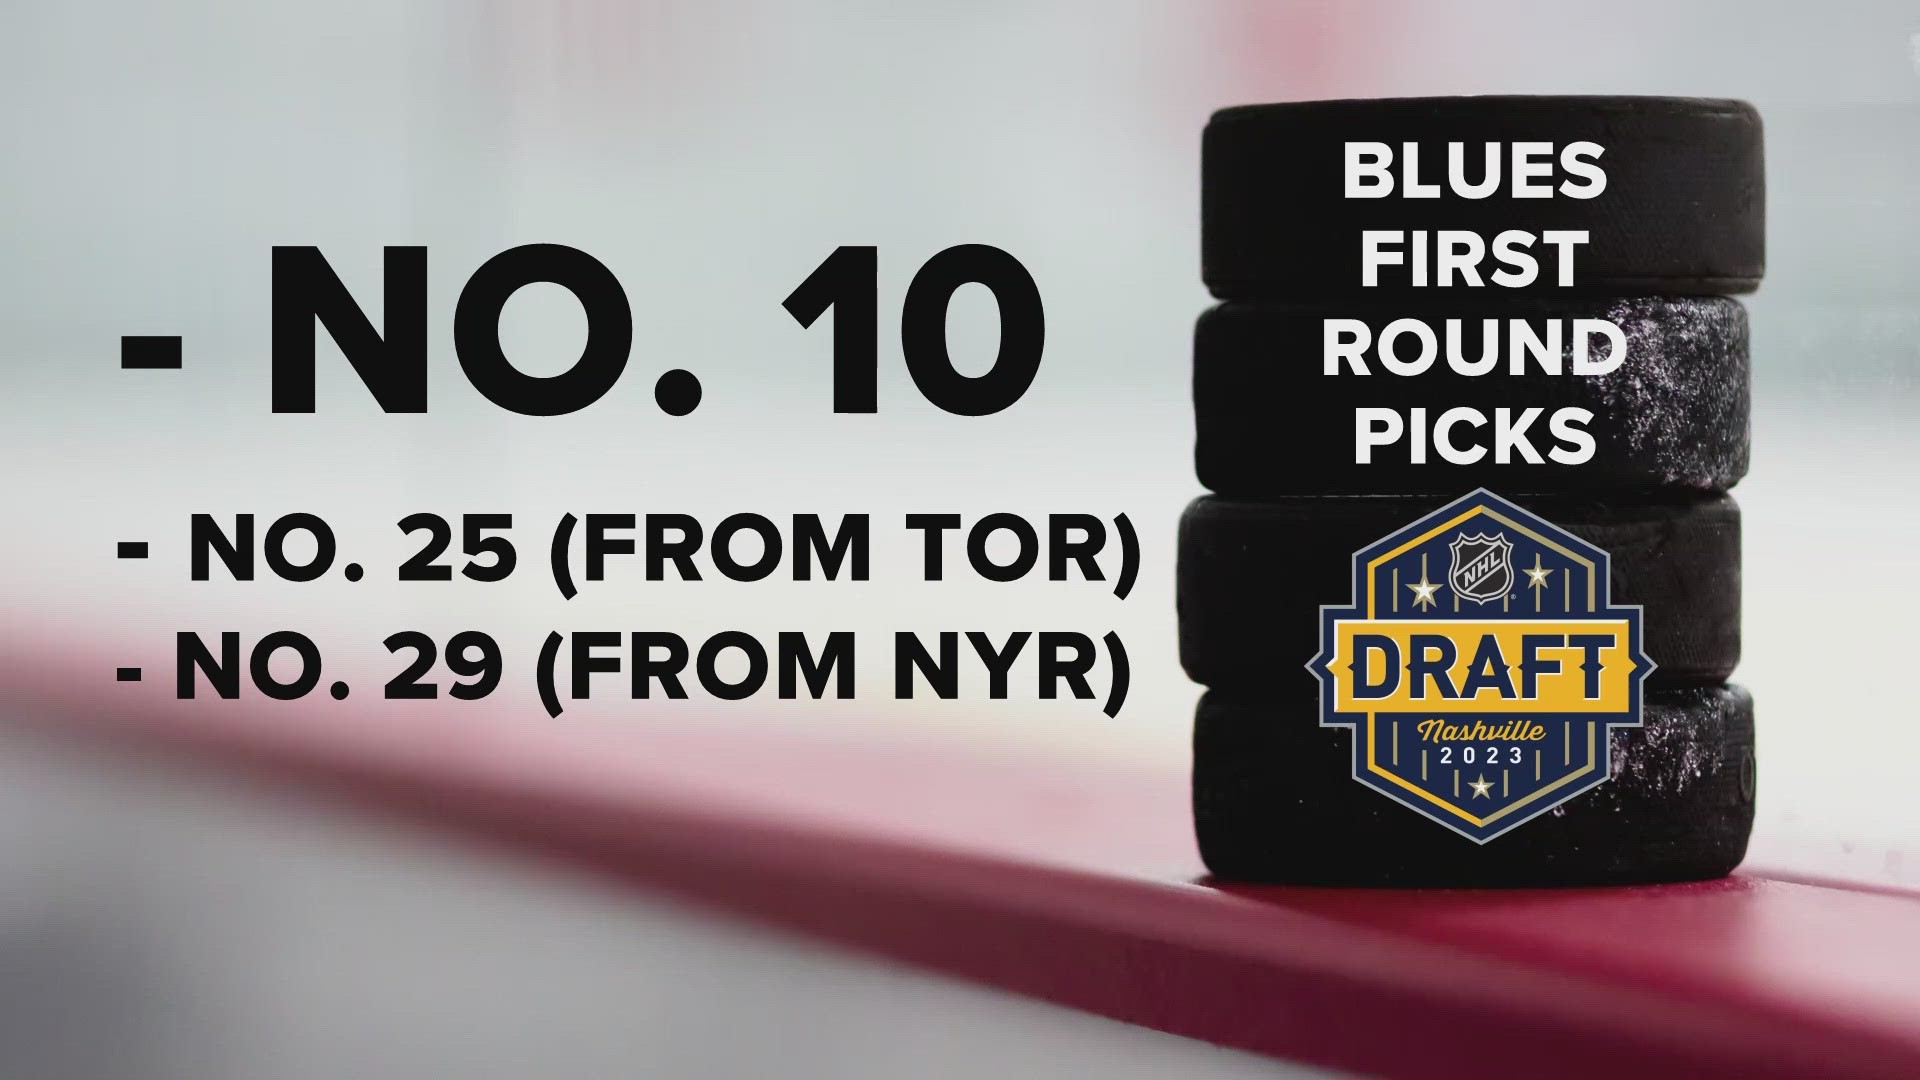 The St. Louis Blues will pick No. 10 overall at the 2023 NHL Draft. Doug Armstrong talks about the team's strategy and who they may draft.